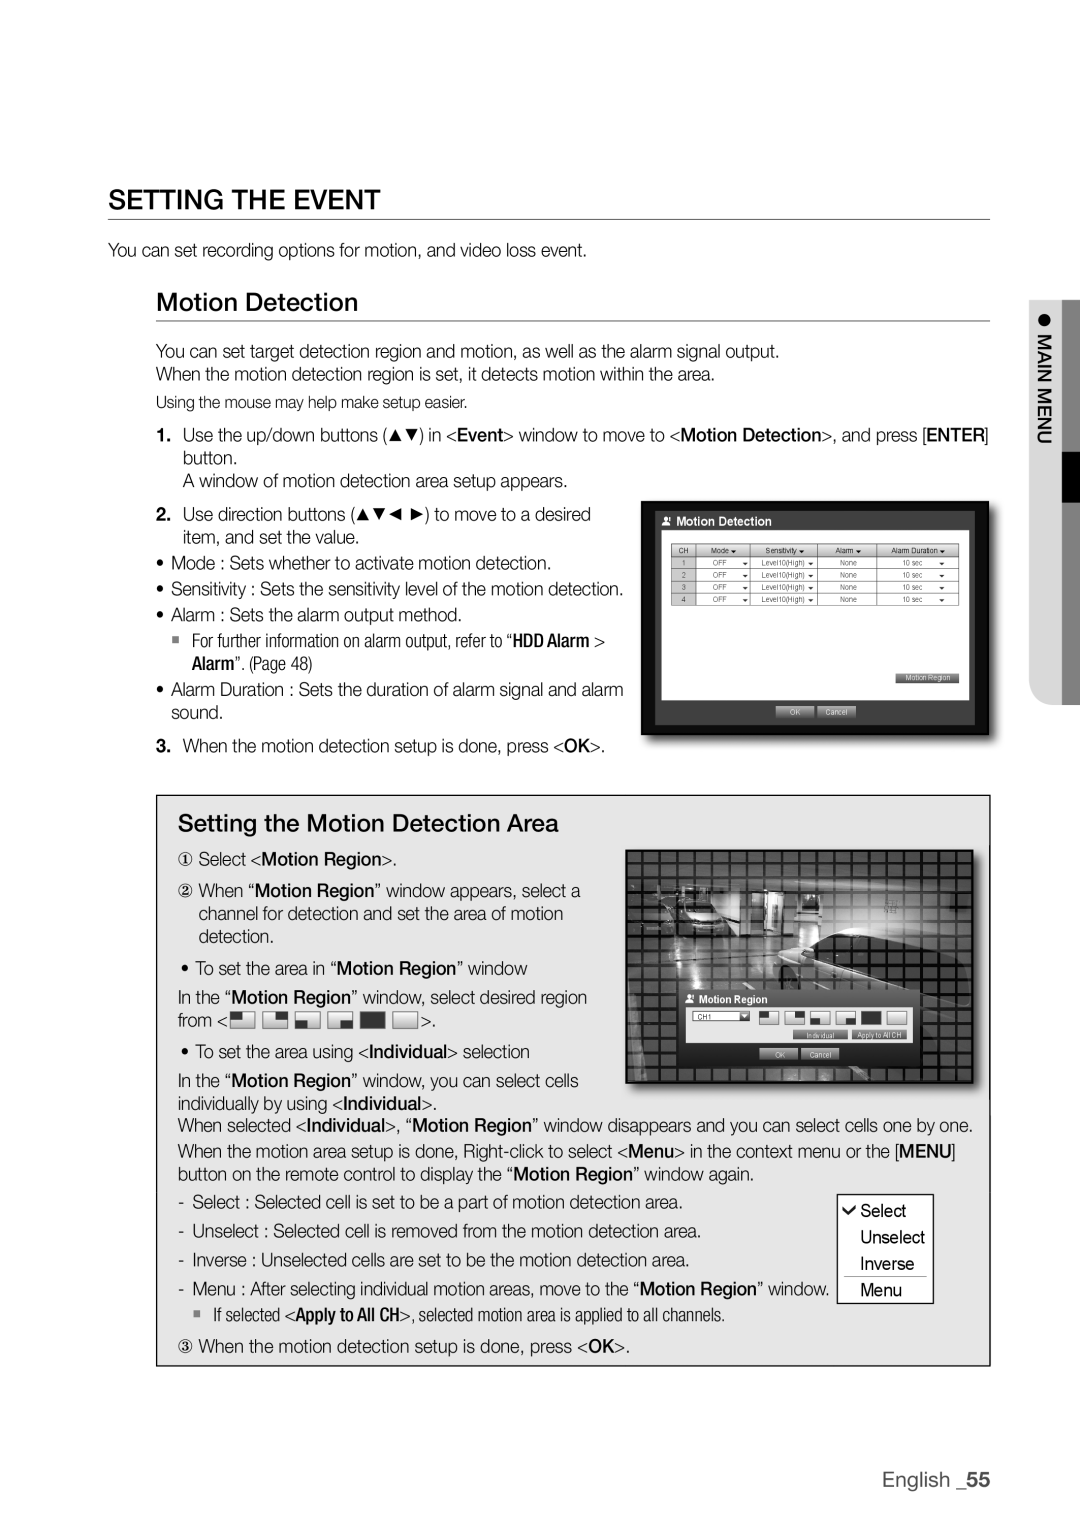 Samsung SDR3100 user manual SeTTinG THe eVenT, Setting the motion Detection area, English _55 